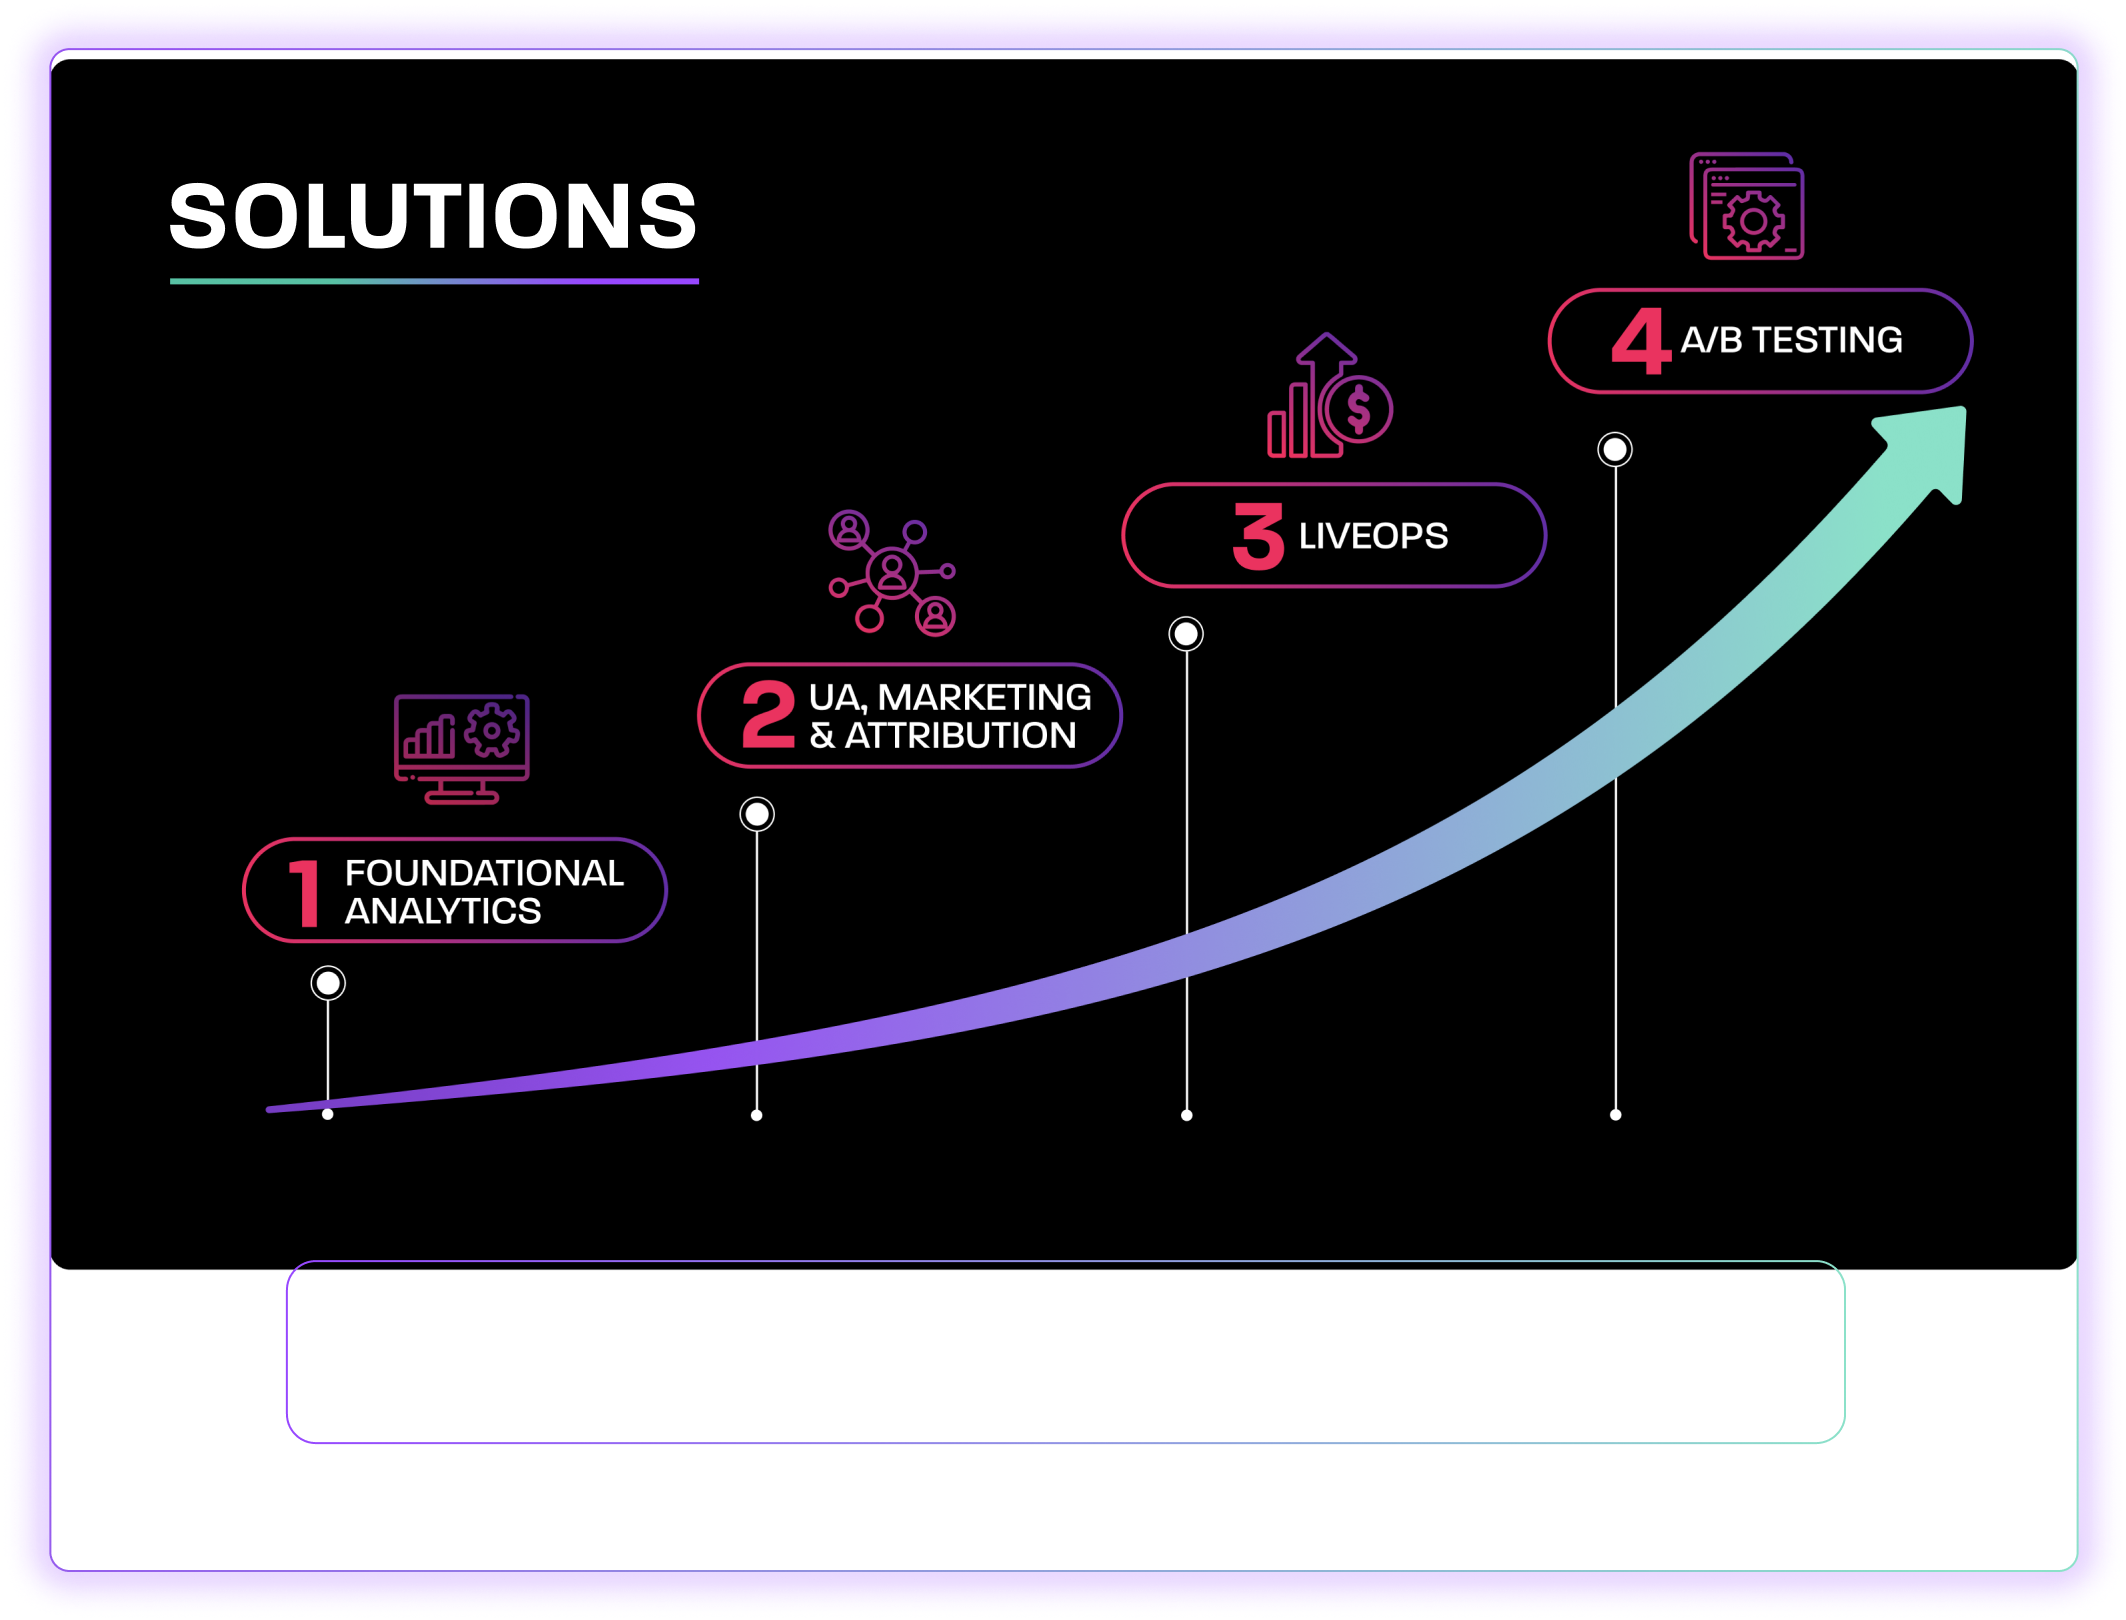 Solutions provided by Helika's web3 gaming analytics platform: foundational analytics, UA, marketing & attribution, game liveops, game A/B testing and optimization.